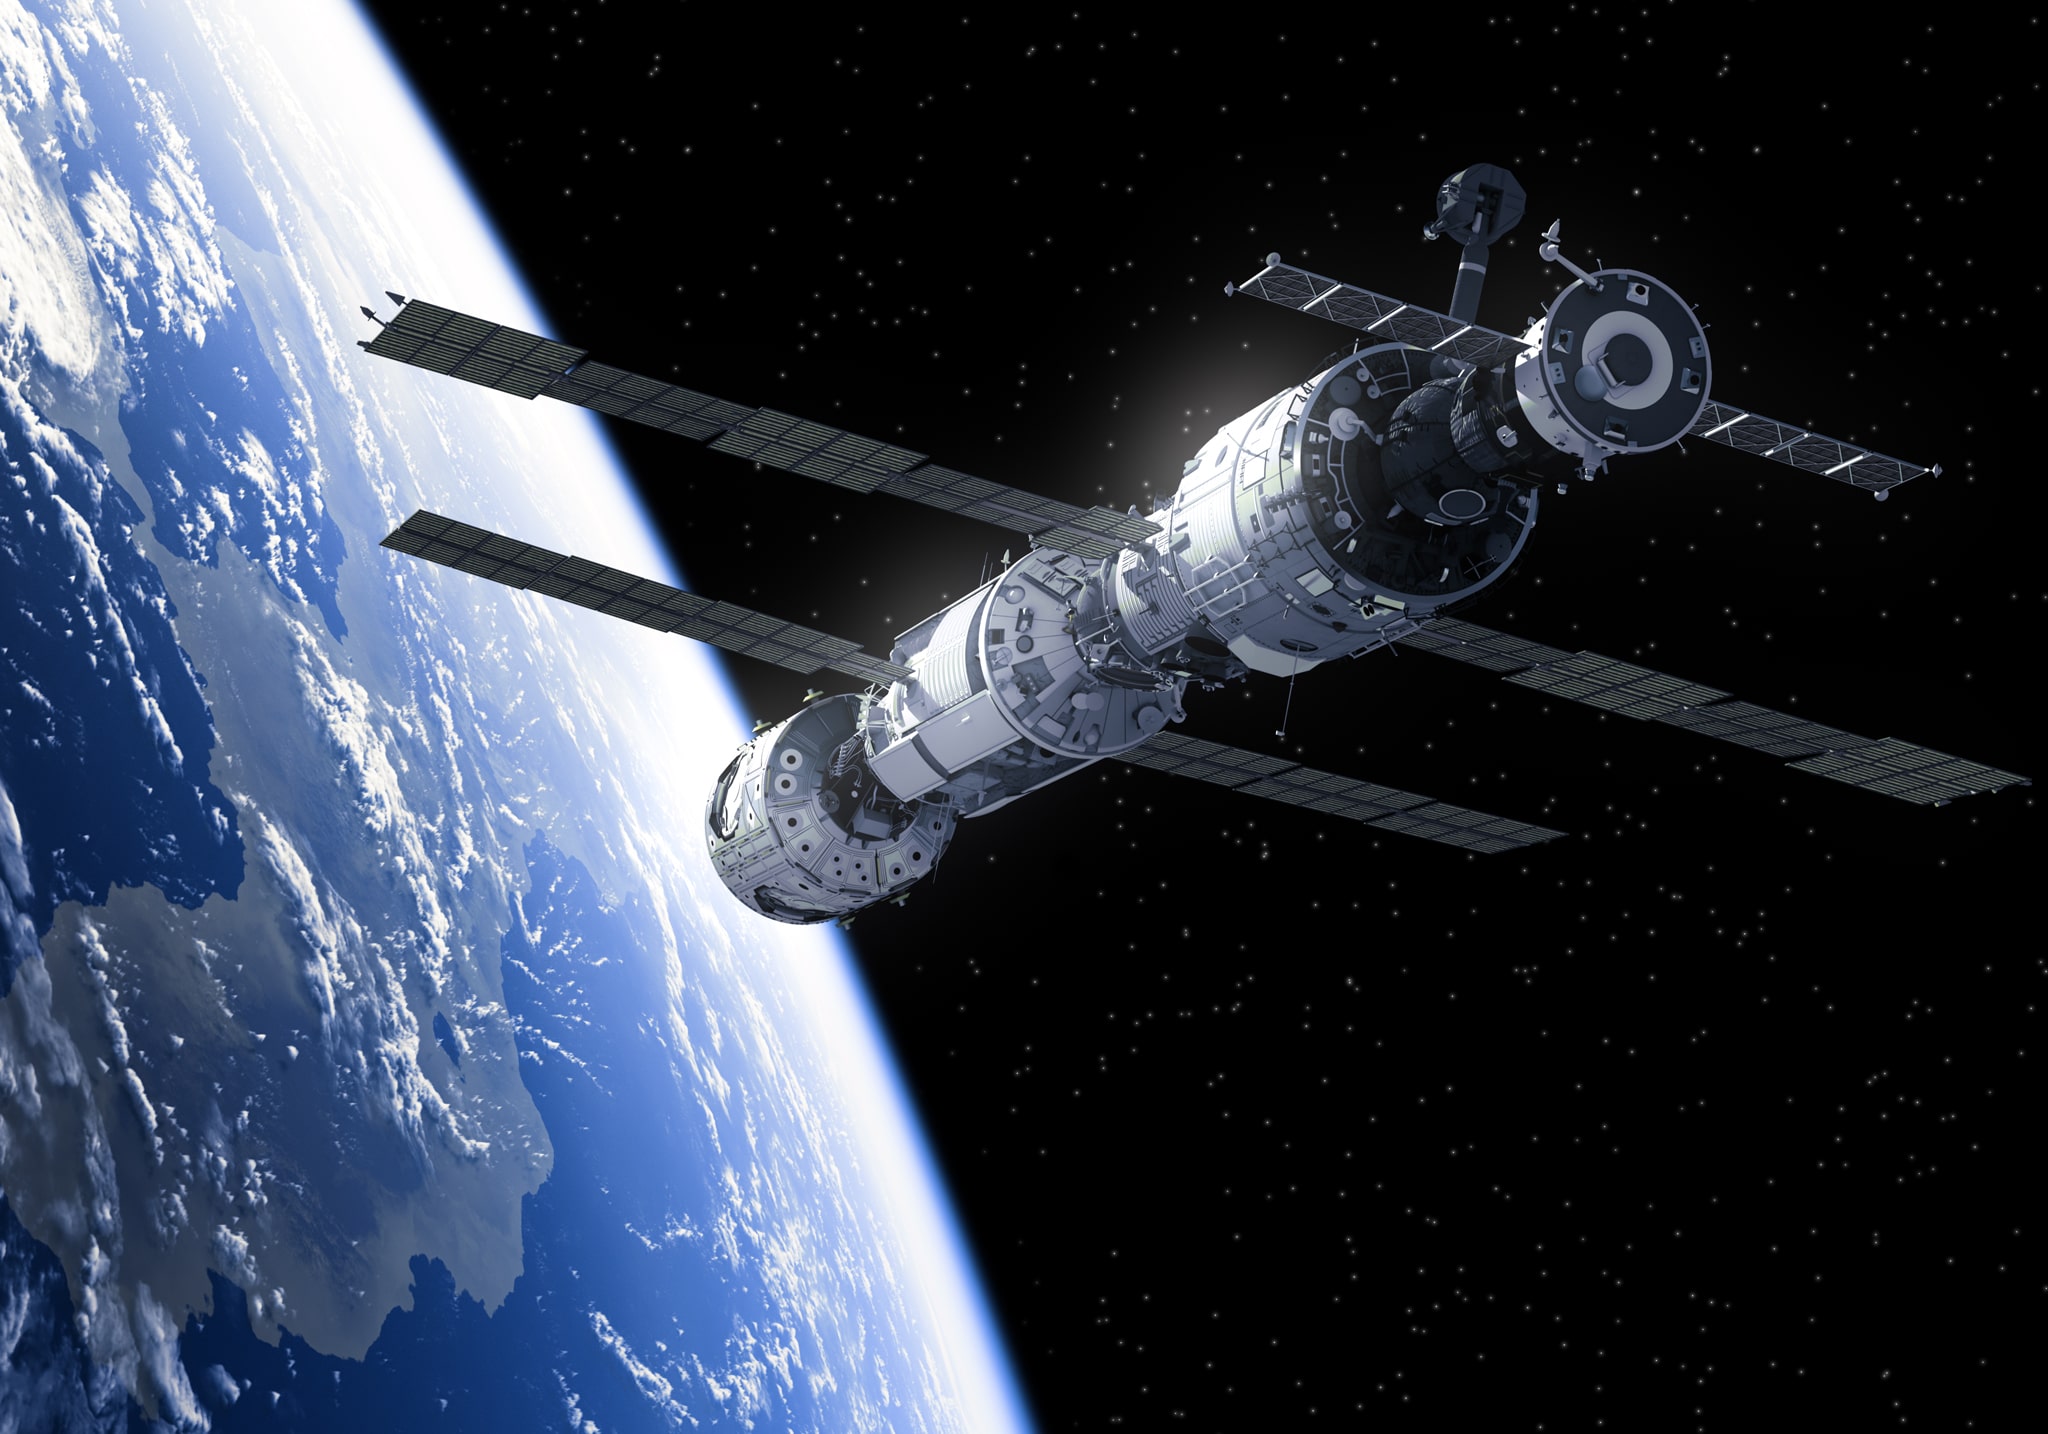 nternational Space Station In Space. 3D Illustration.